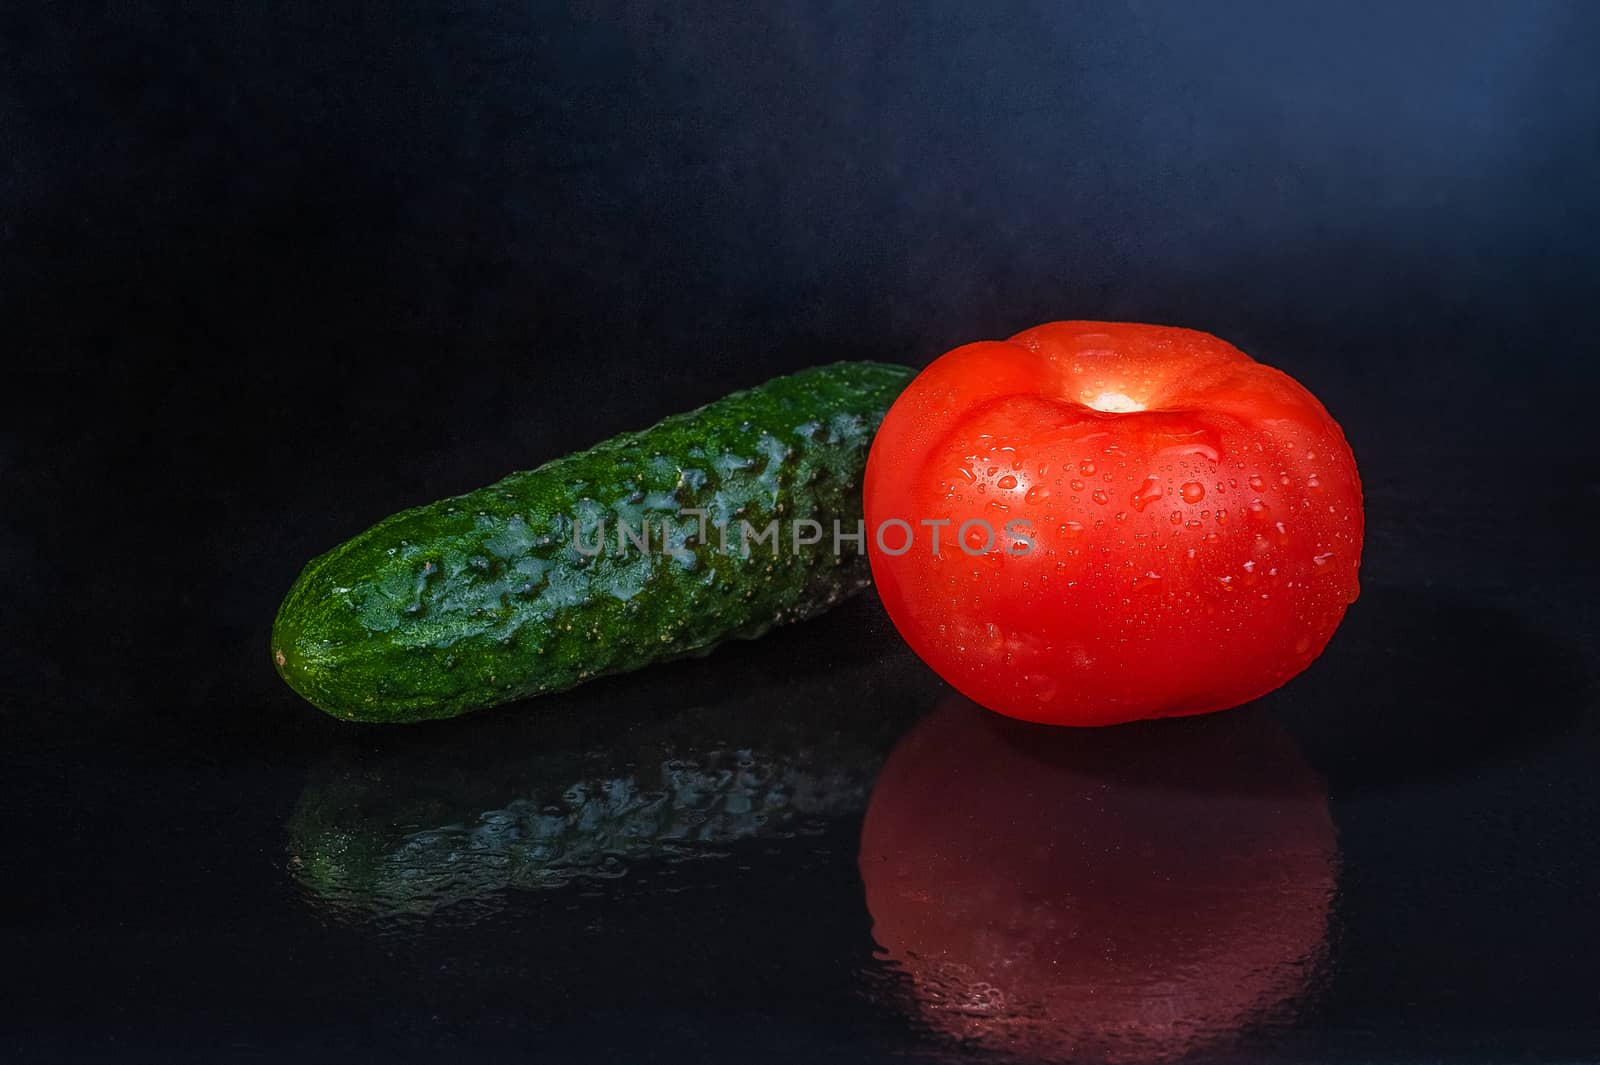 fresh vegetables - green cucumber and red tomato on an isolated black background with reflection by chernobrovin